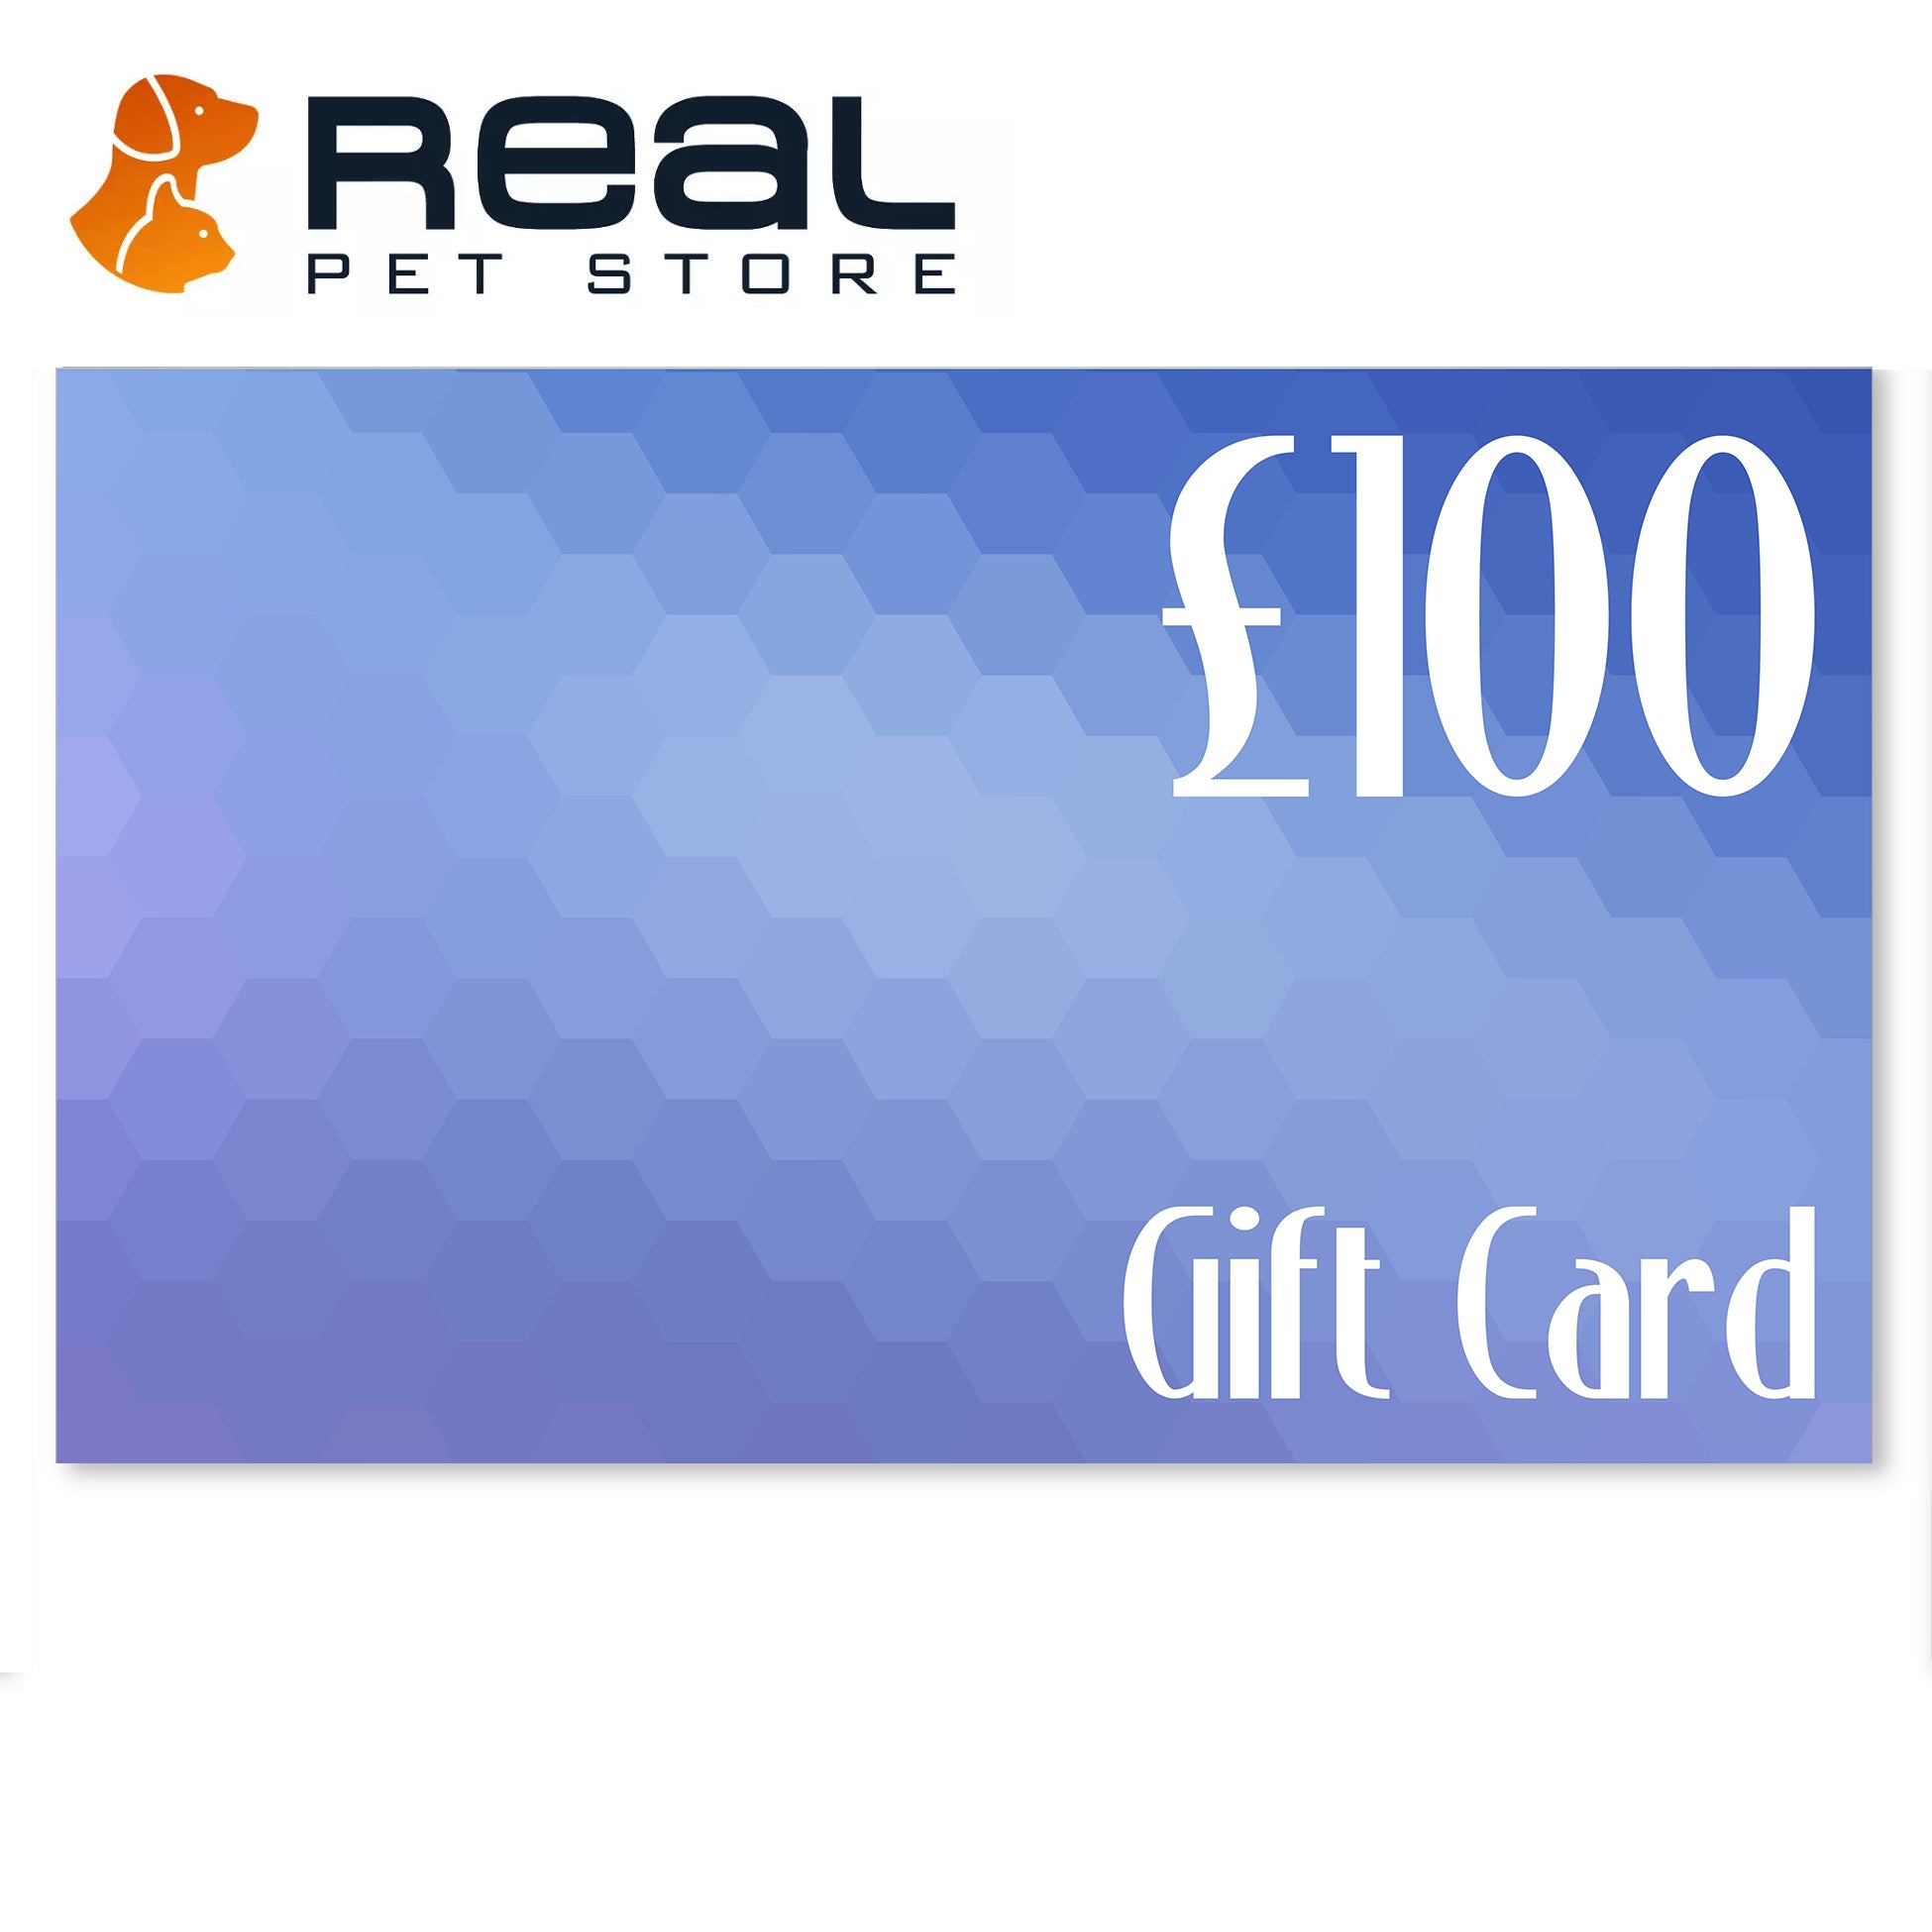 Real Pet Store Gift Card £100 - Real Pets